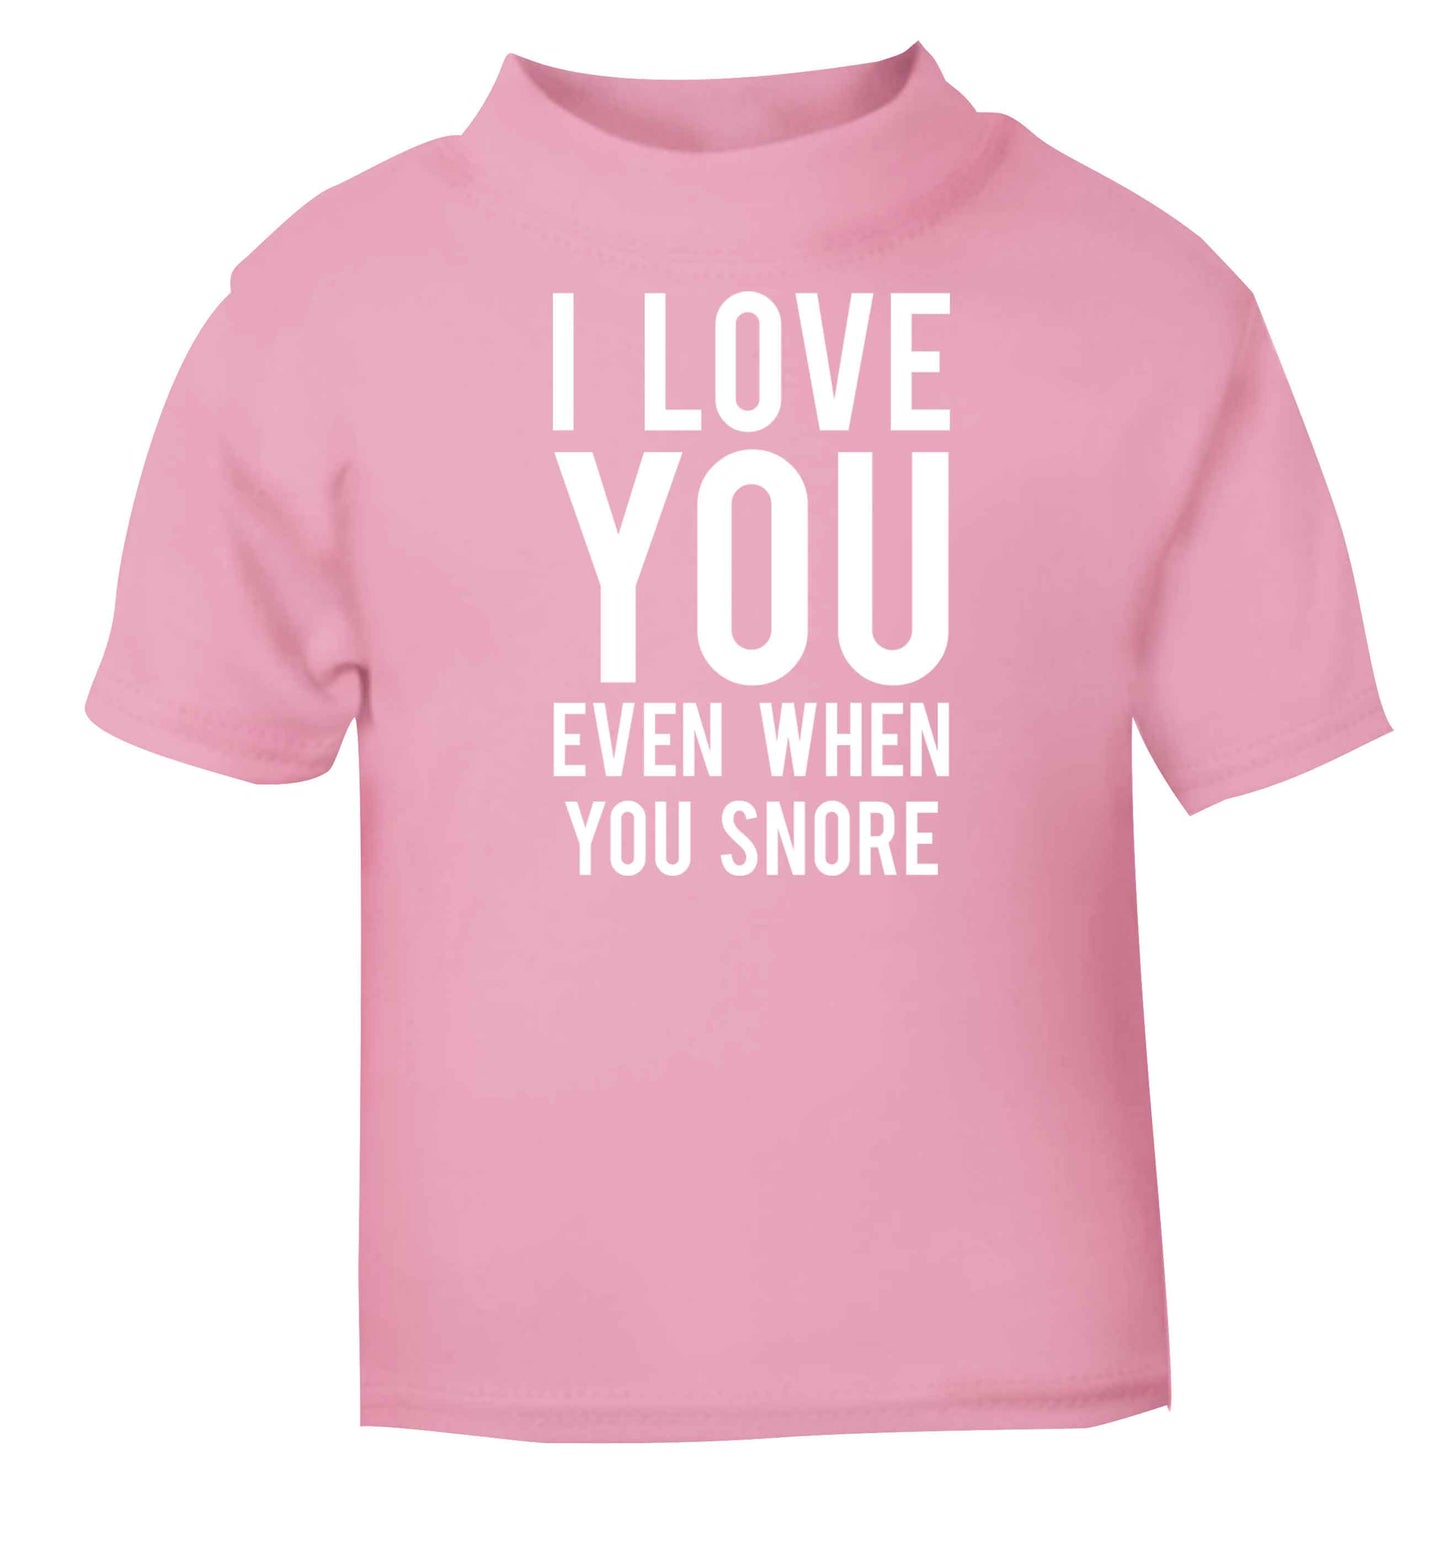 I love you even when you snore light pink baby toddler Tshirt 2 Years